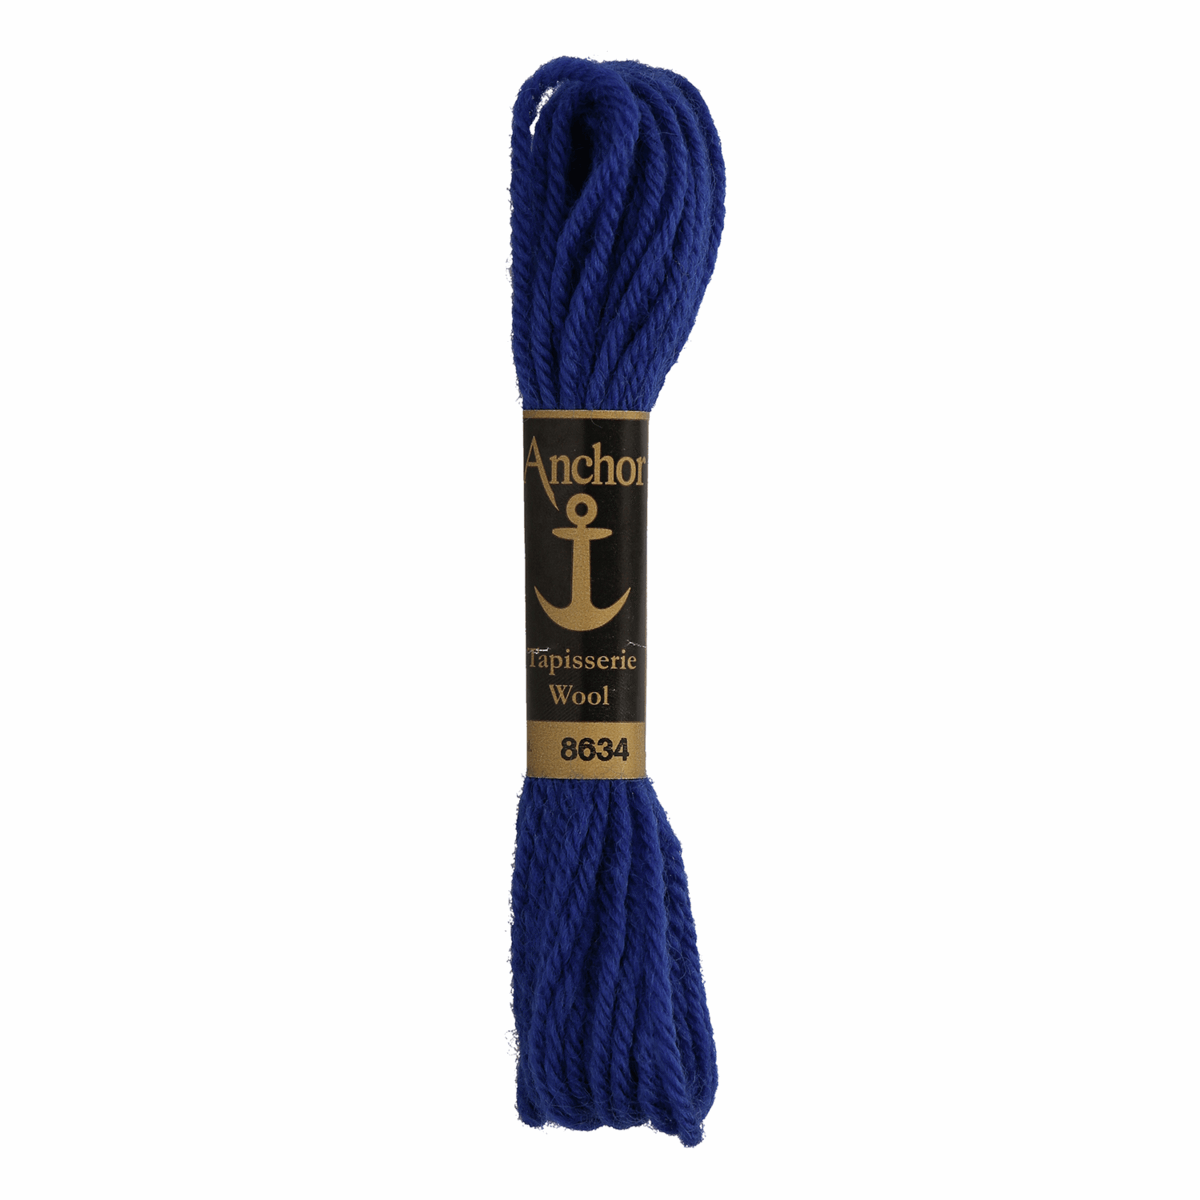 Anchor Tapestry Wool - Shade 8634 - 10m